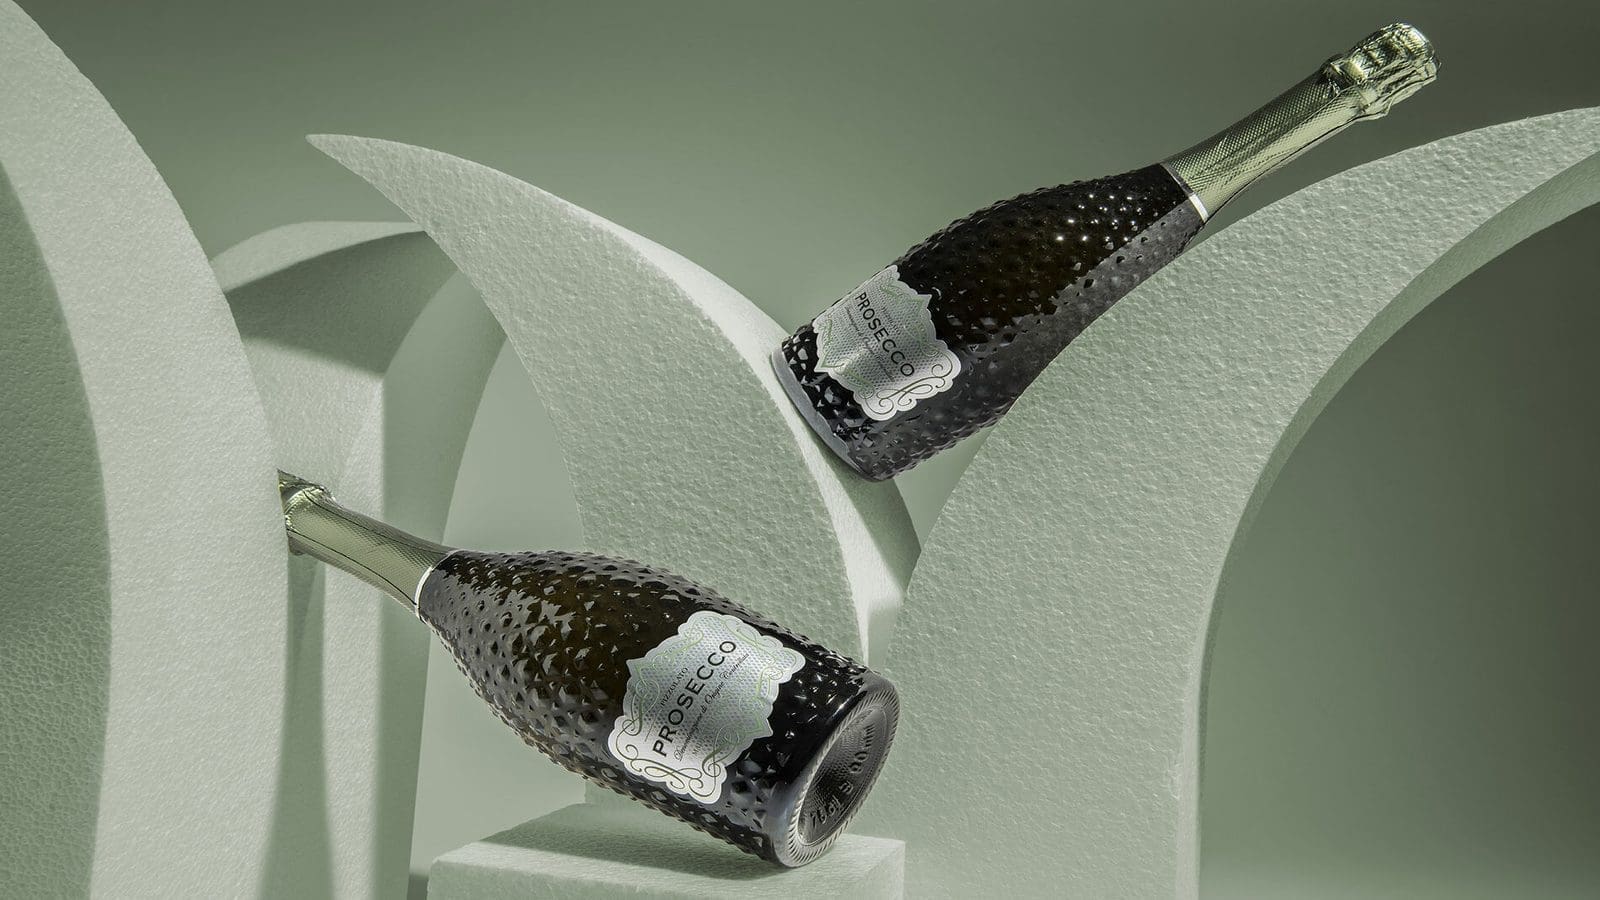 Italian wine Prosecco DOC gains trademark protection in EU-New Zealand free-trade agreement